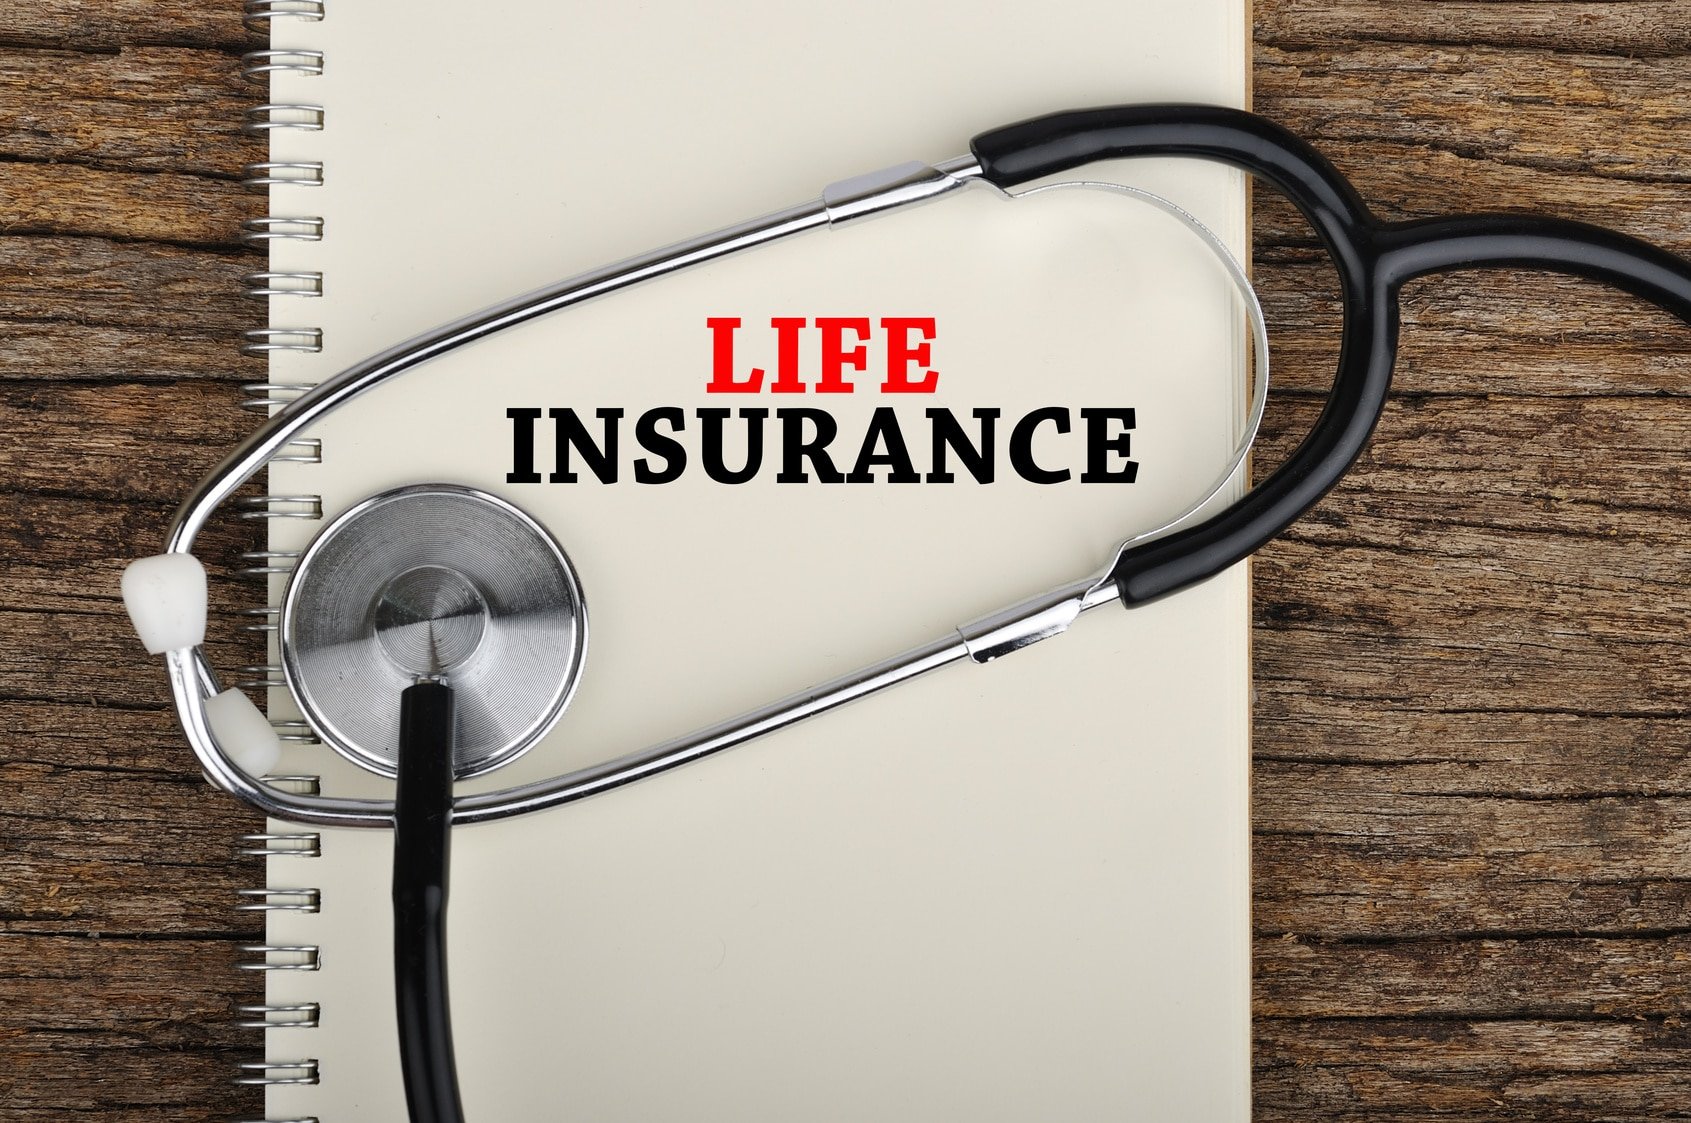 Life Insurance Payout After Death: Claim Process & Timeline